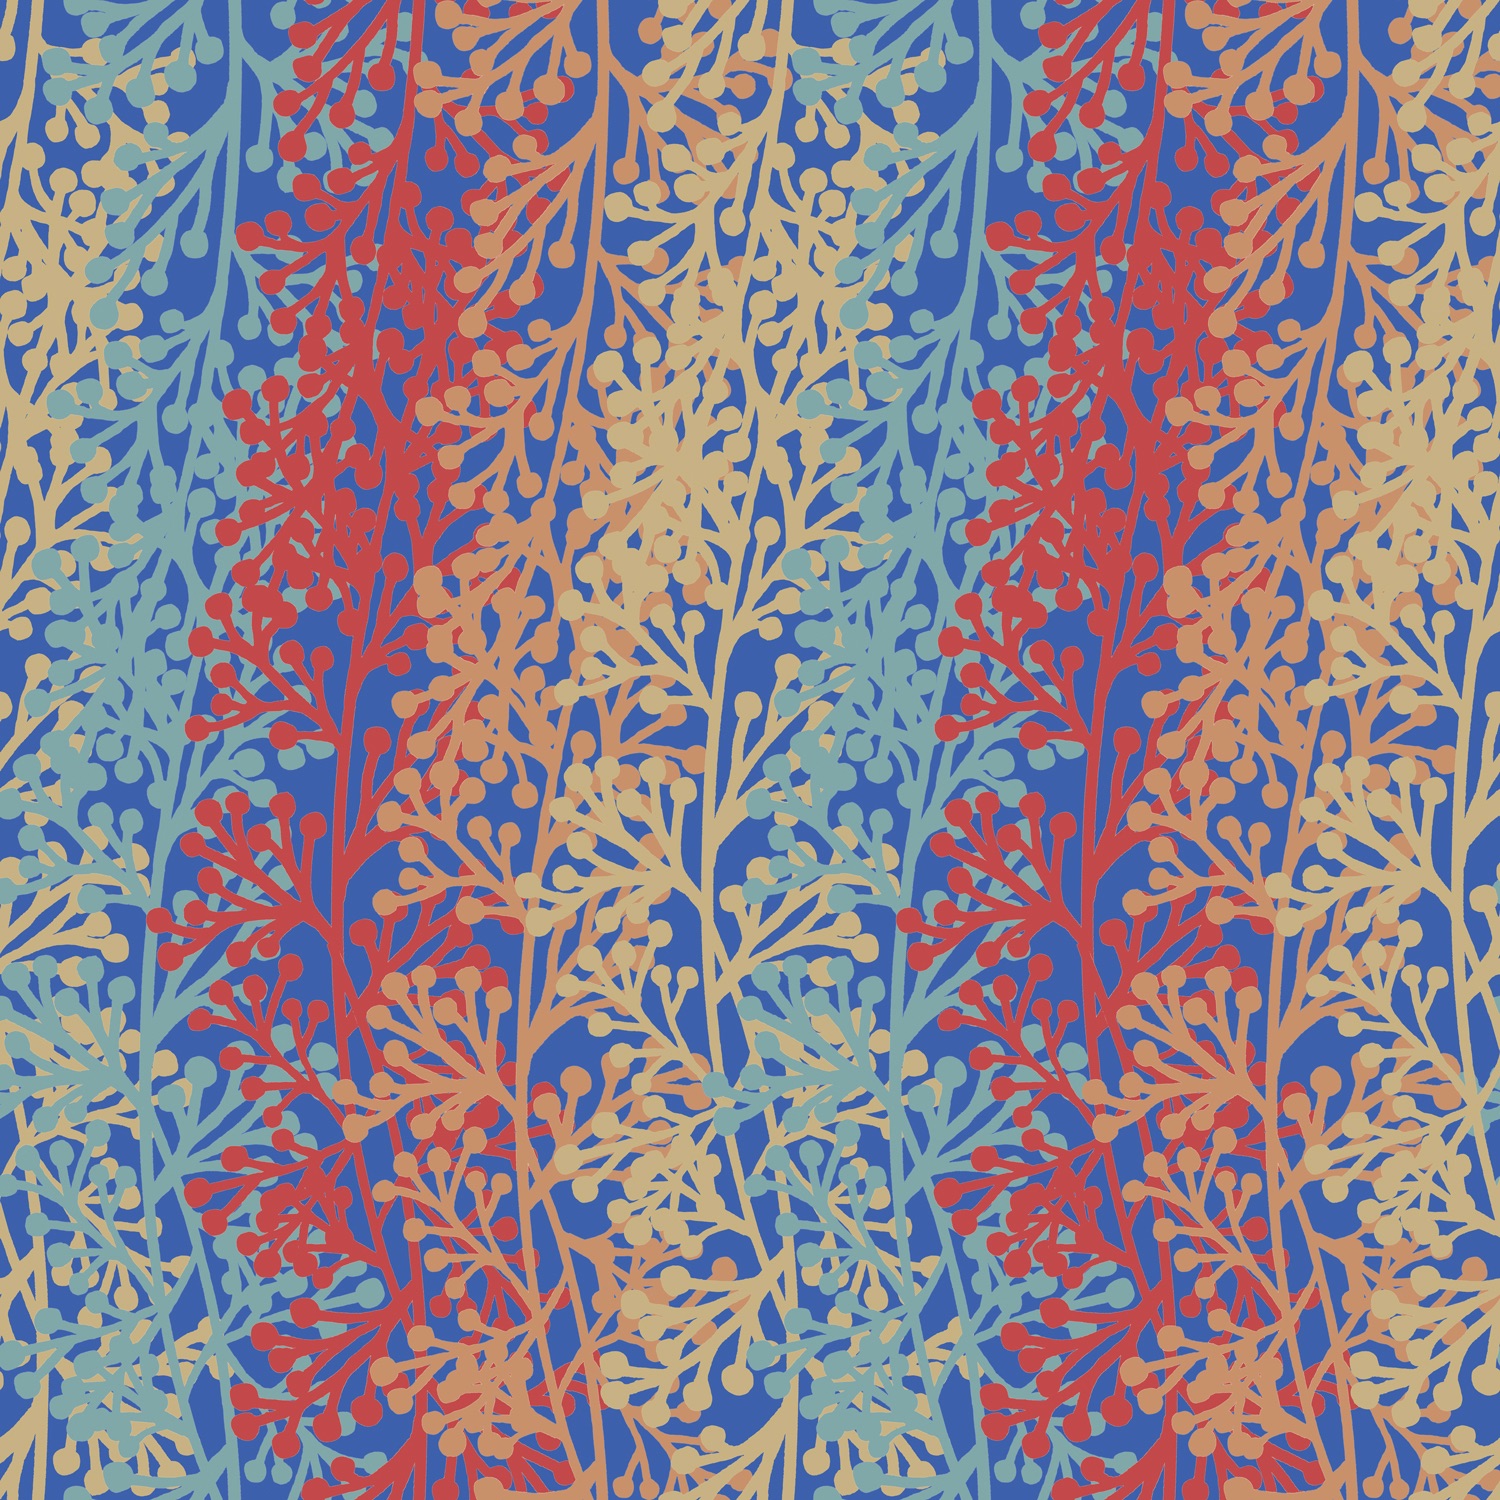 Floating Fronds fabric design